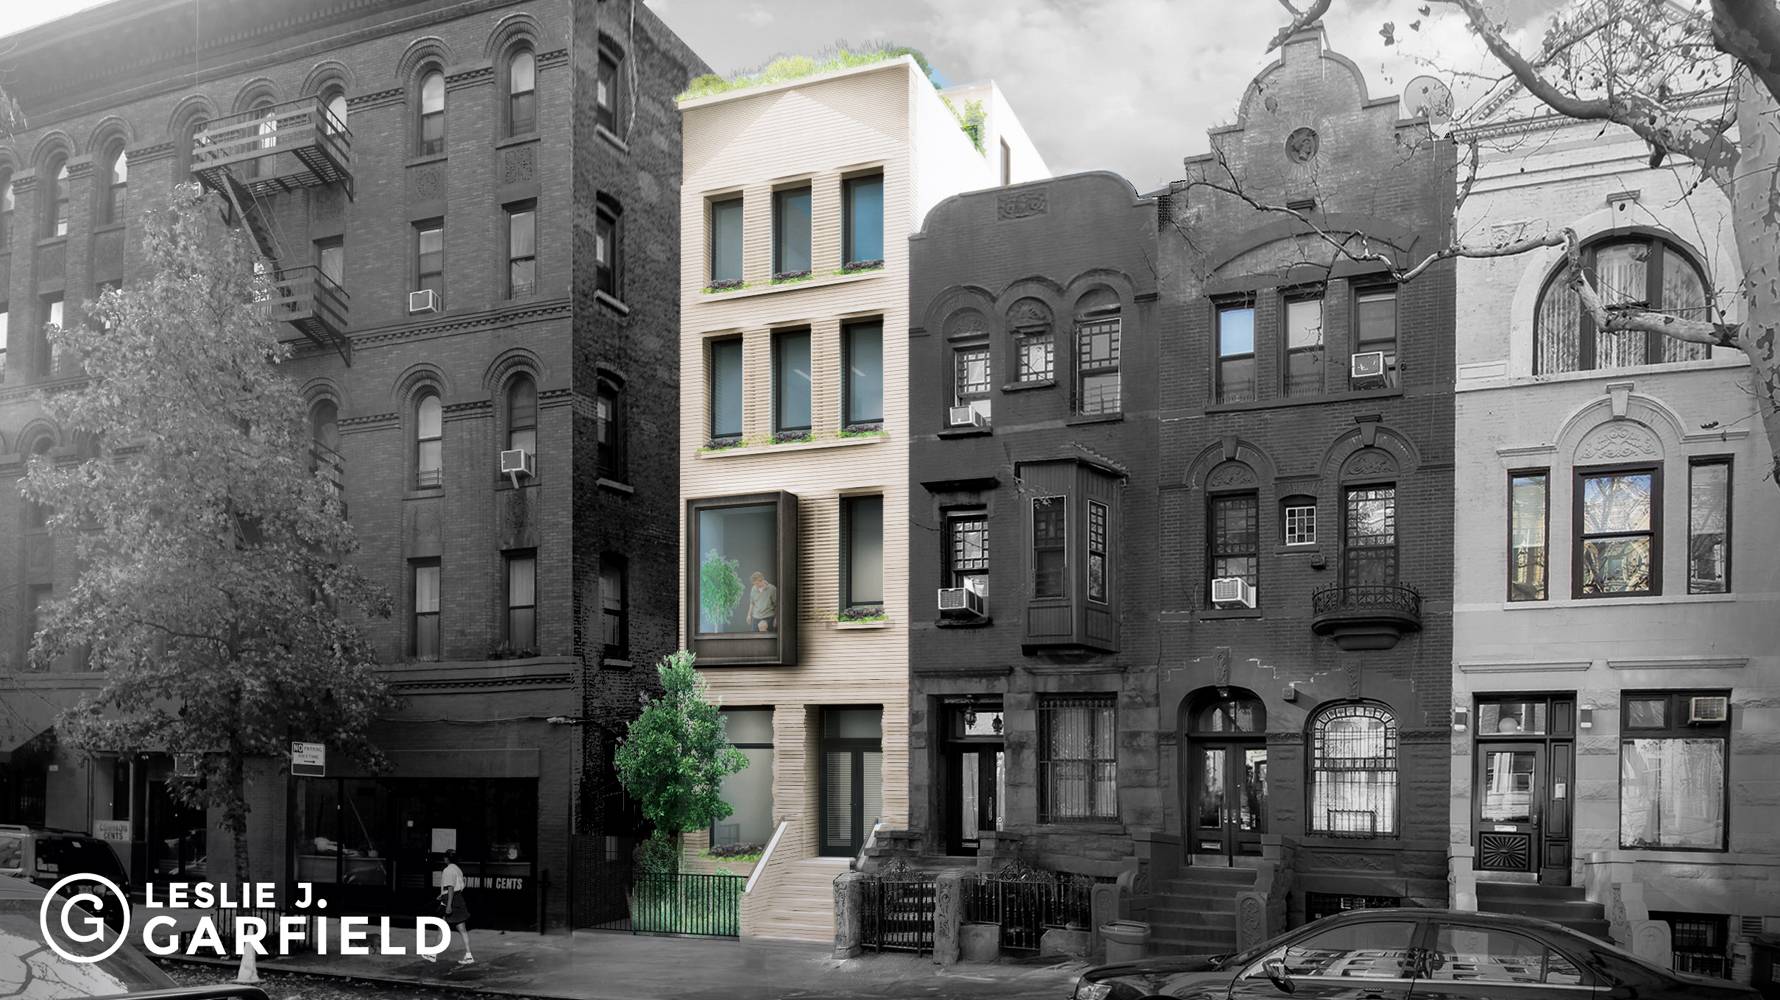 Located on one of the most picturesque, townhouse blocks on the Upper West Side, 110 West 88th Street presents a rare opportunity to build a fully permitted, new construction one ...